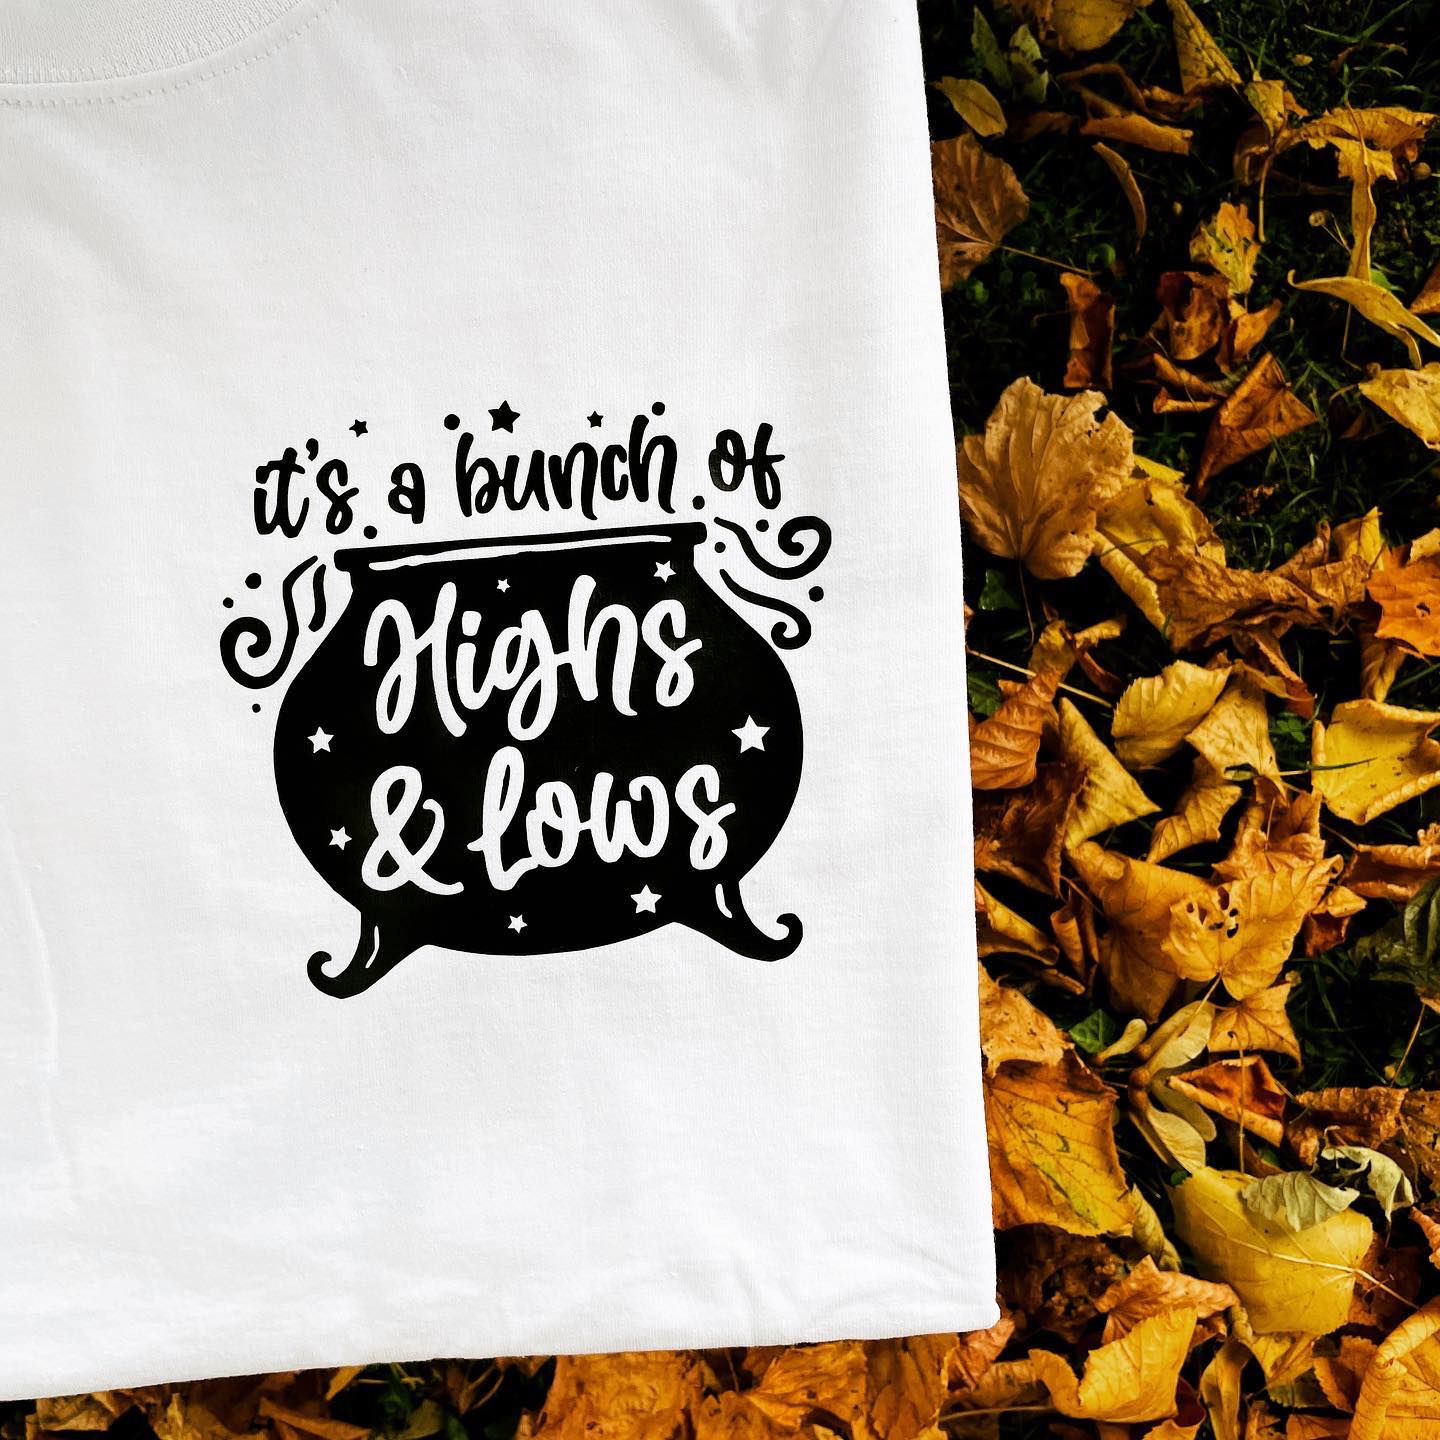 It's A Bunch Of Highs & Lows T Shirt